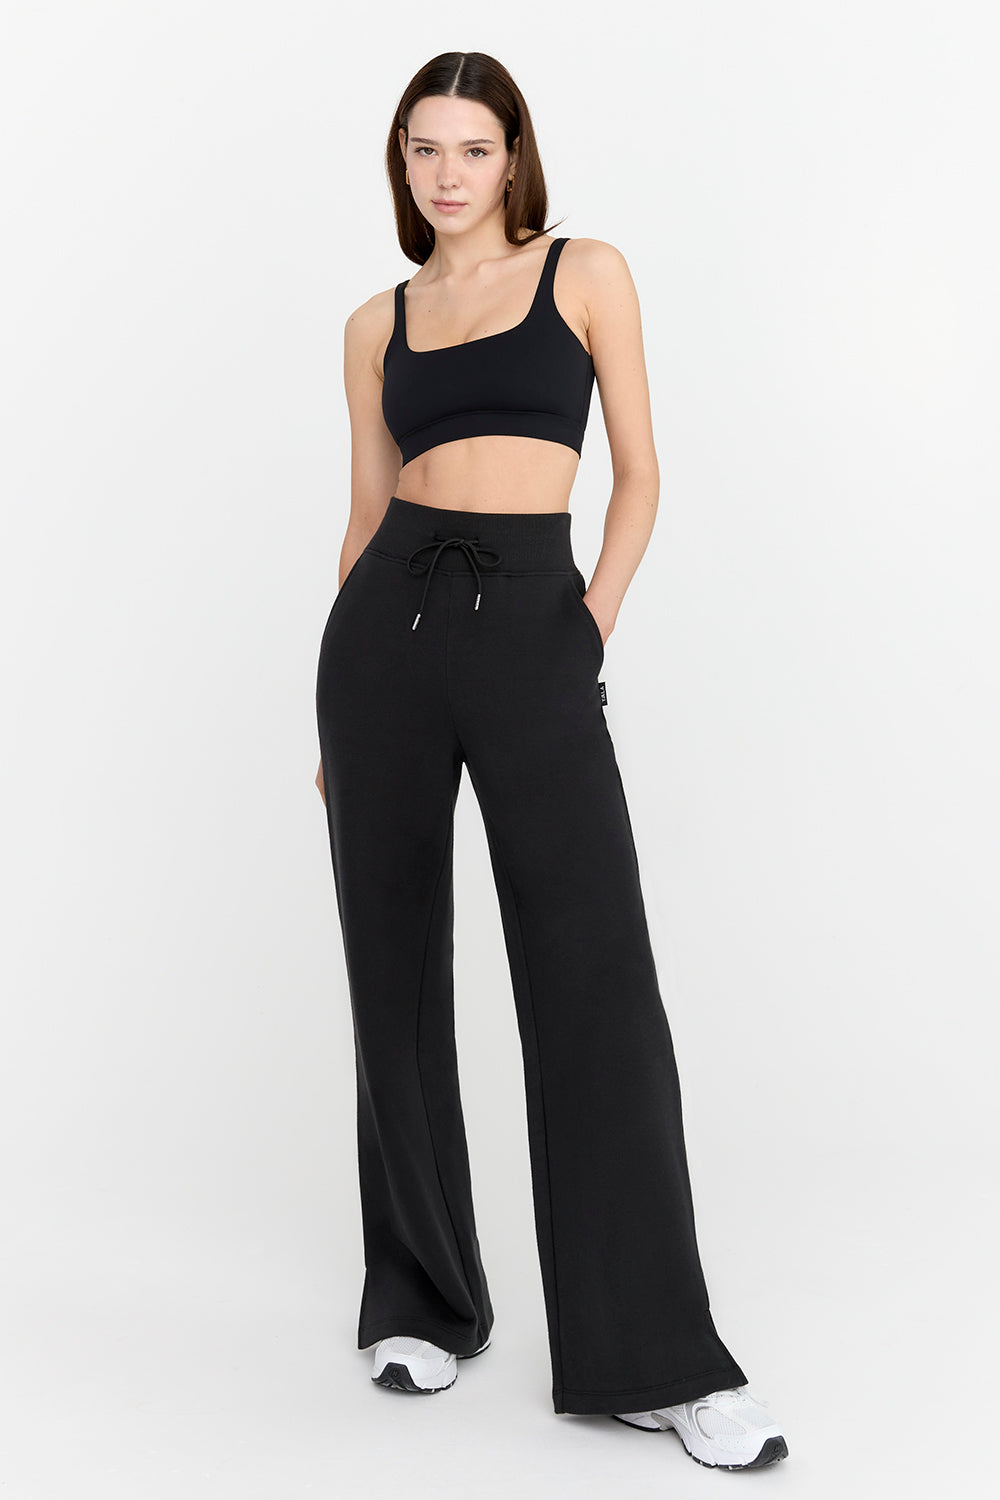 Unbranded Women Slit Flared Palazzo Trousers Wide Leg High India